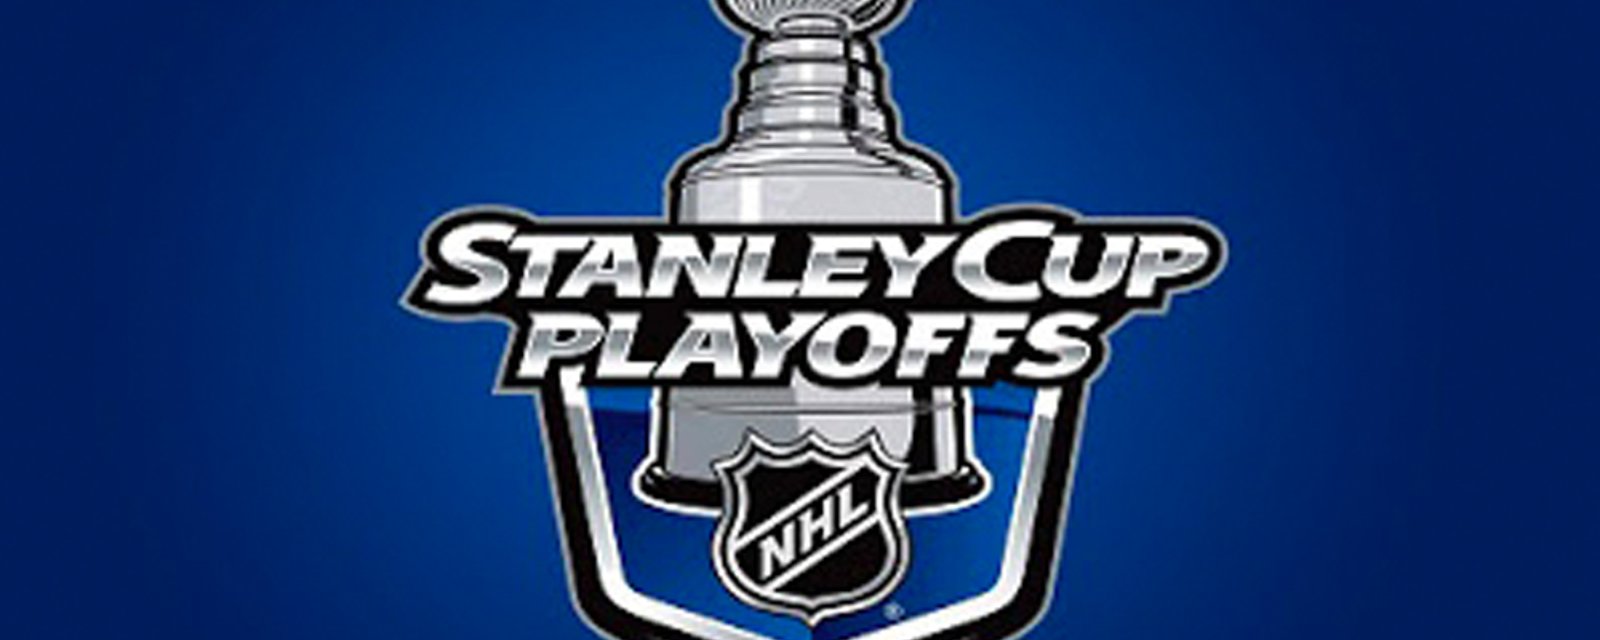 NHL discussing four city Stanley Cup Playoff format